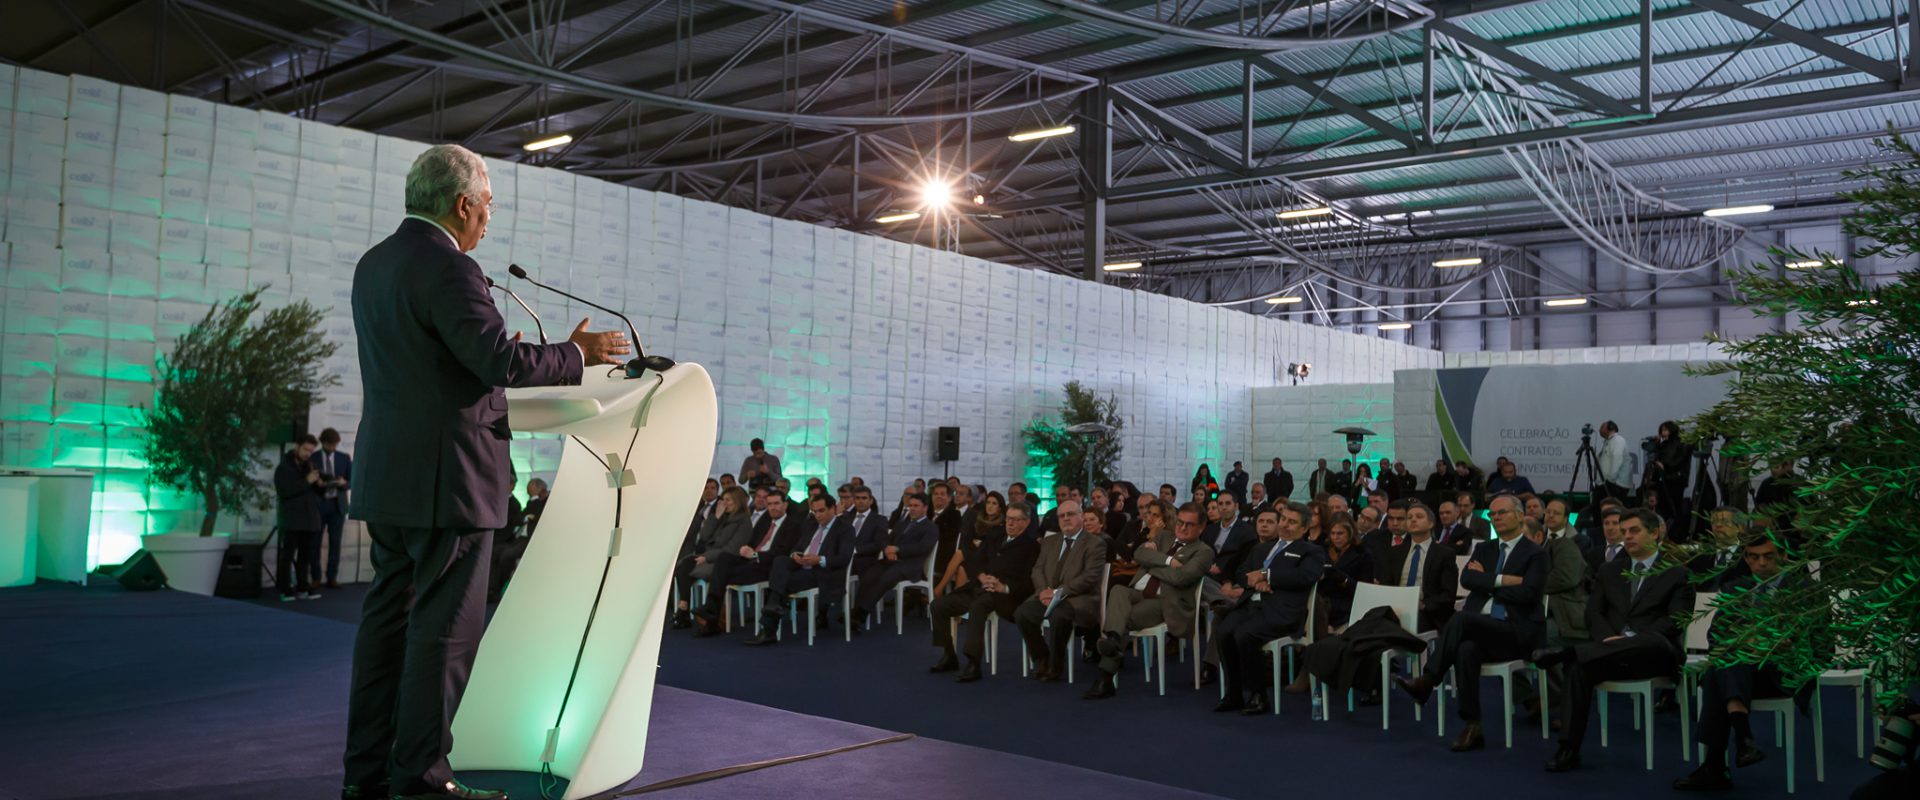 Prime Minister, António Costa, speeching at Celbi